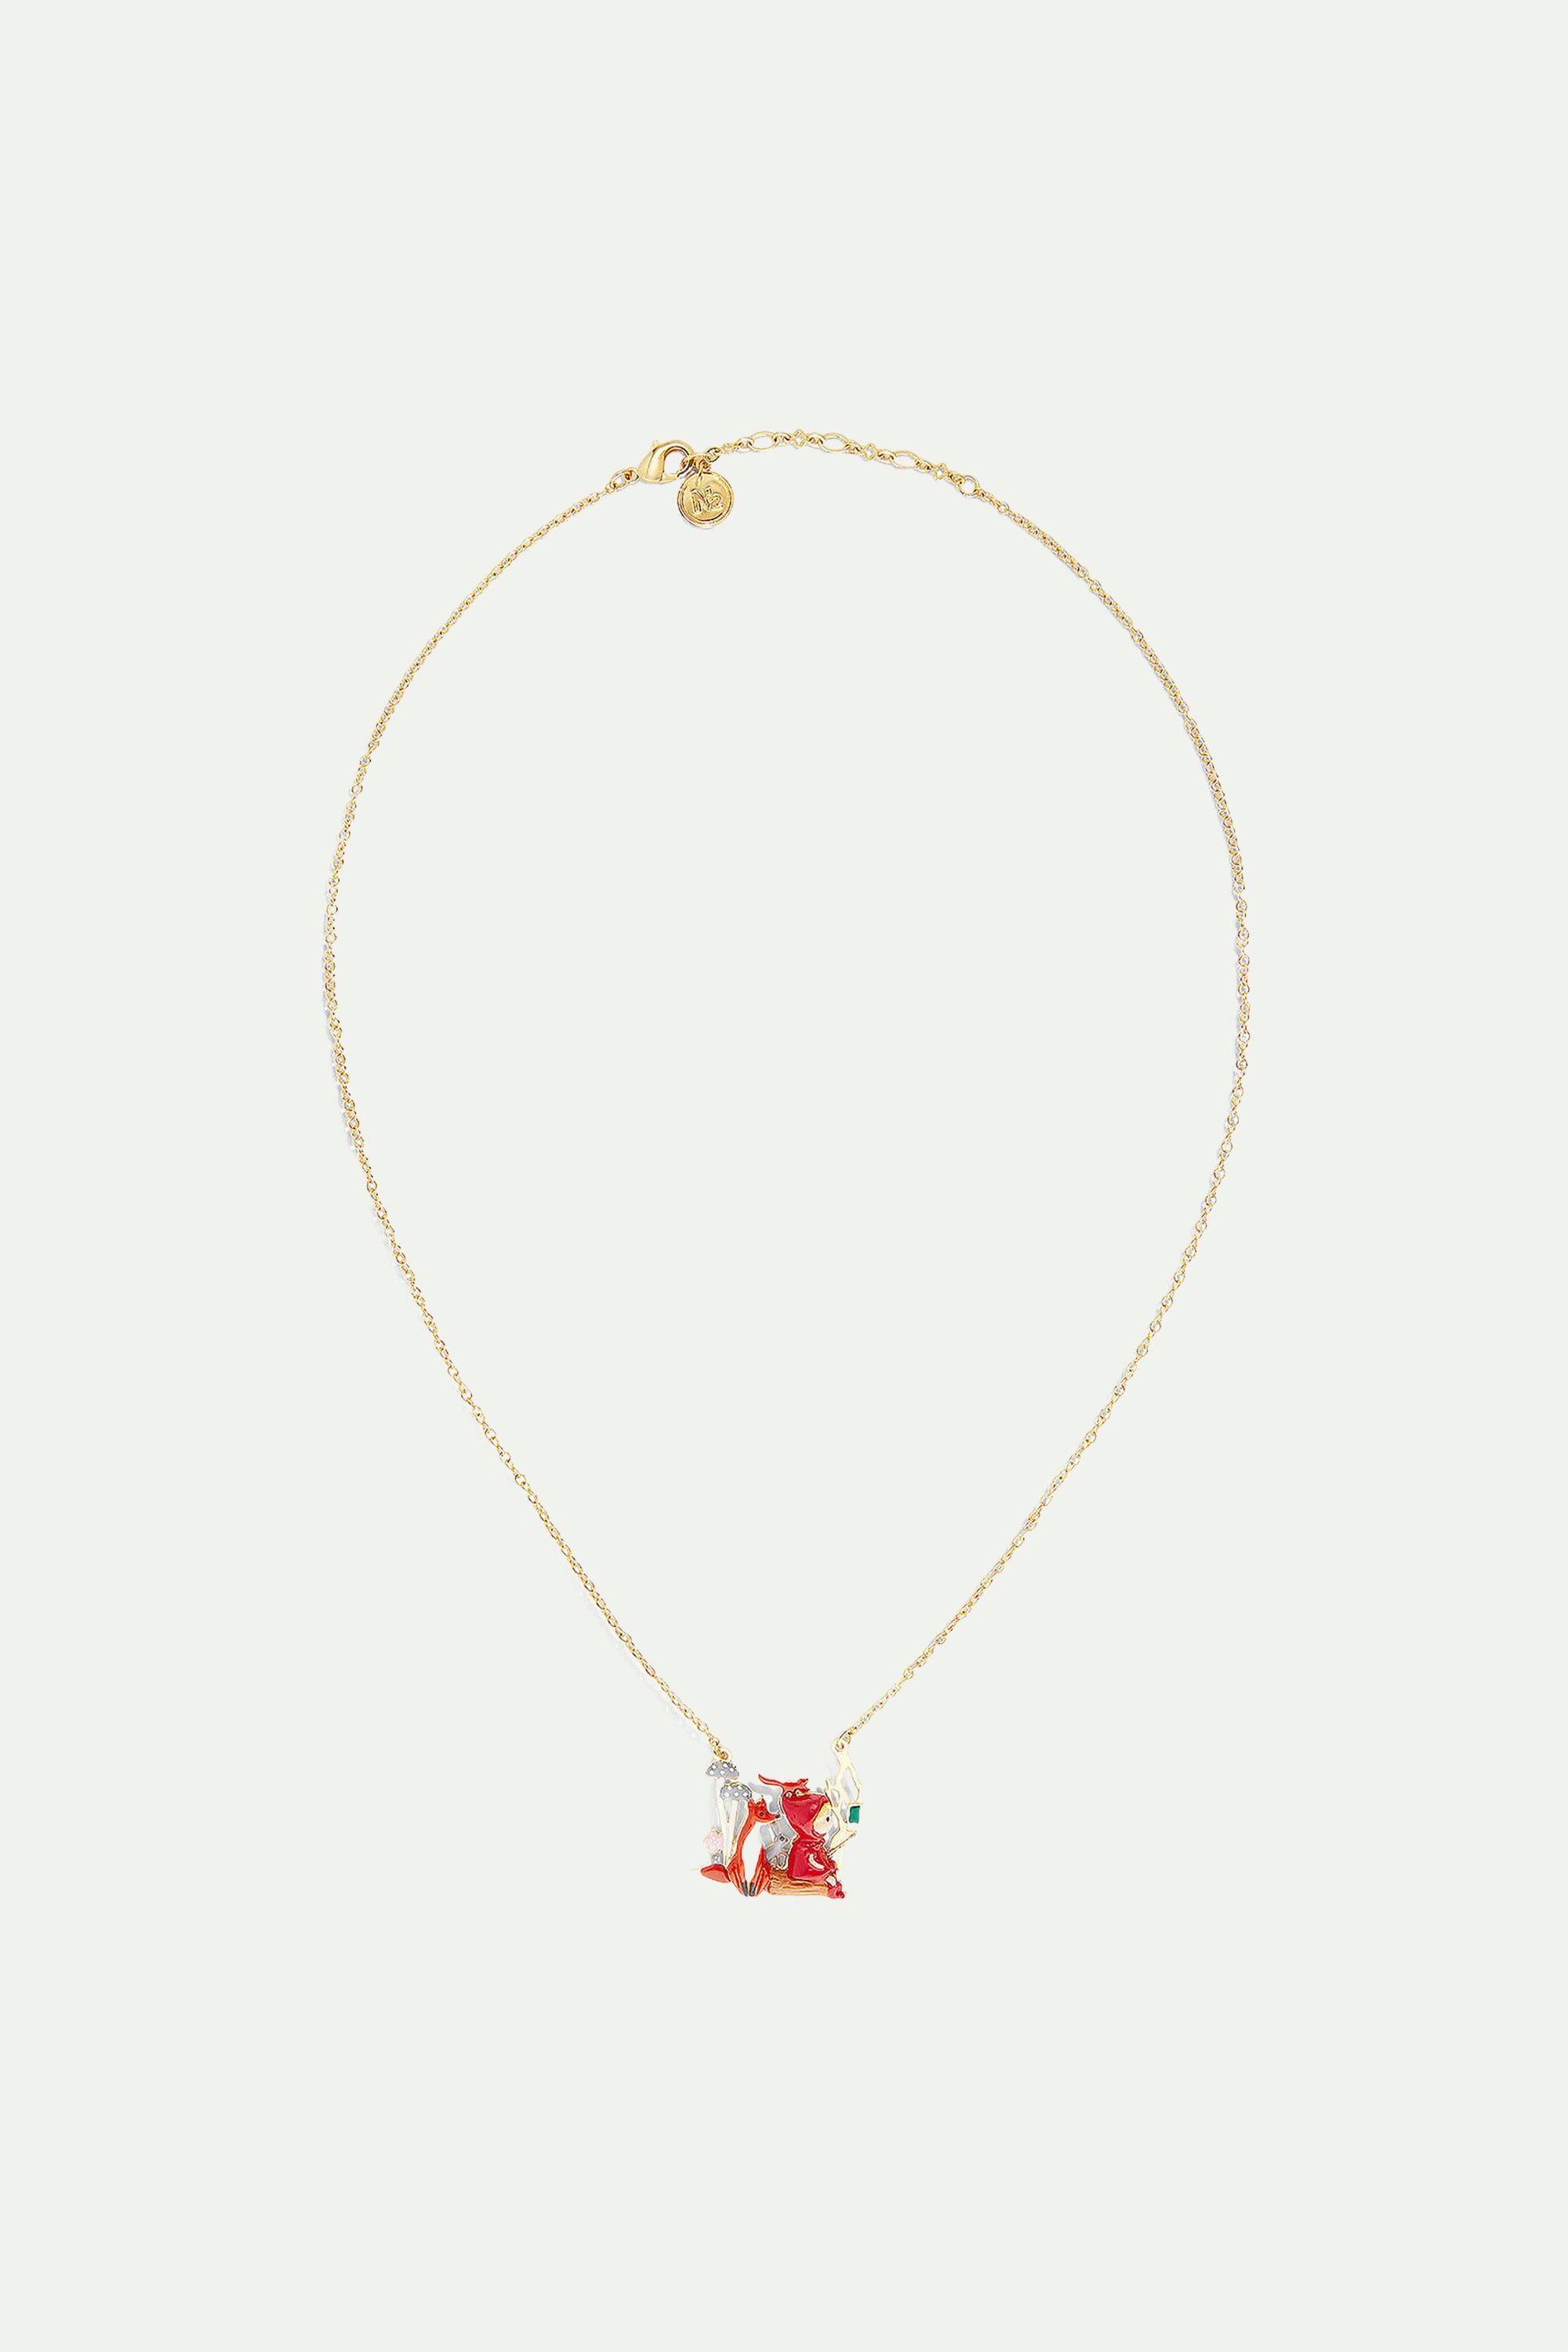 Little Red Riding Hood, Fox and Rabbit pendant necklace